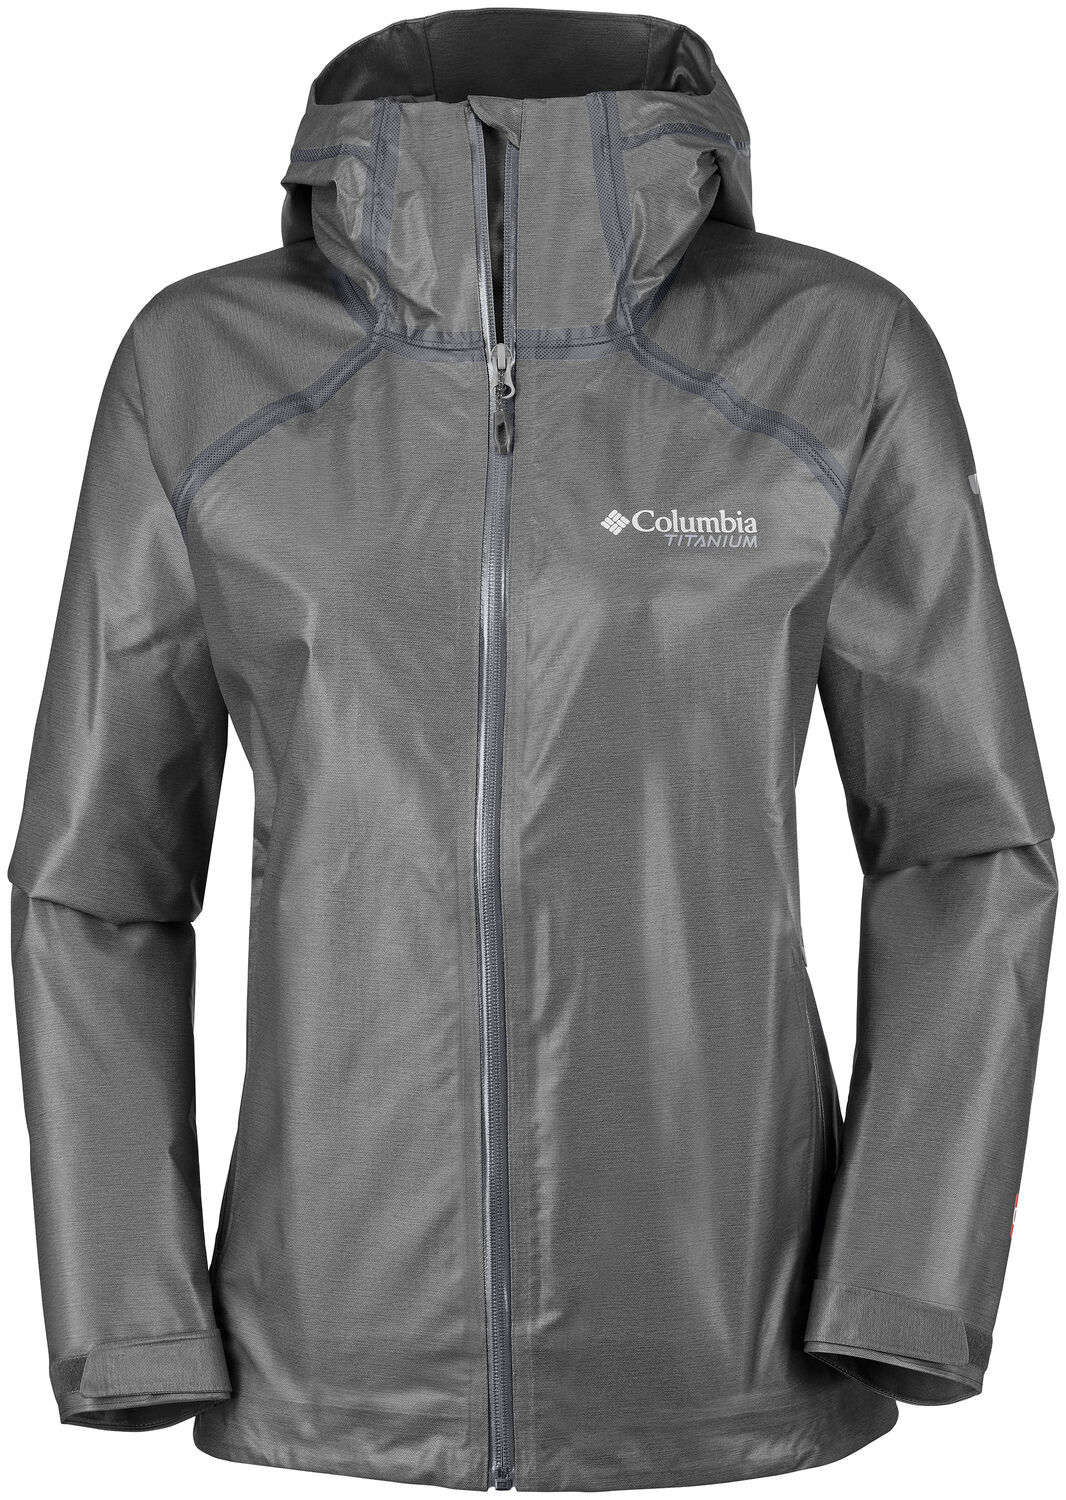 Columbia - OutDry Ex Reign Jacket - Chaqueta impermeable - Mujer